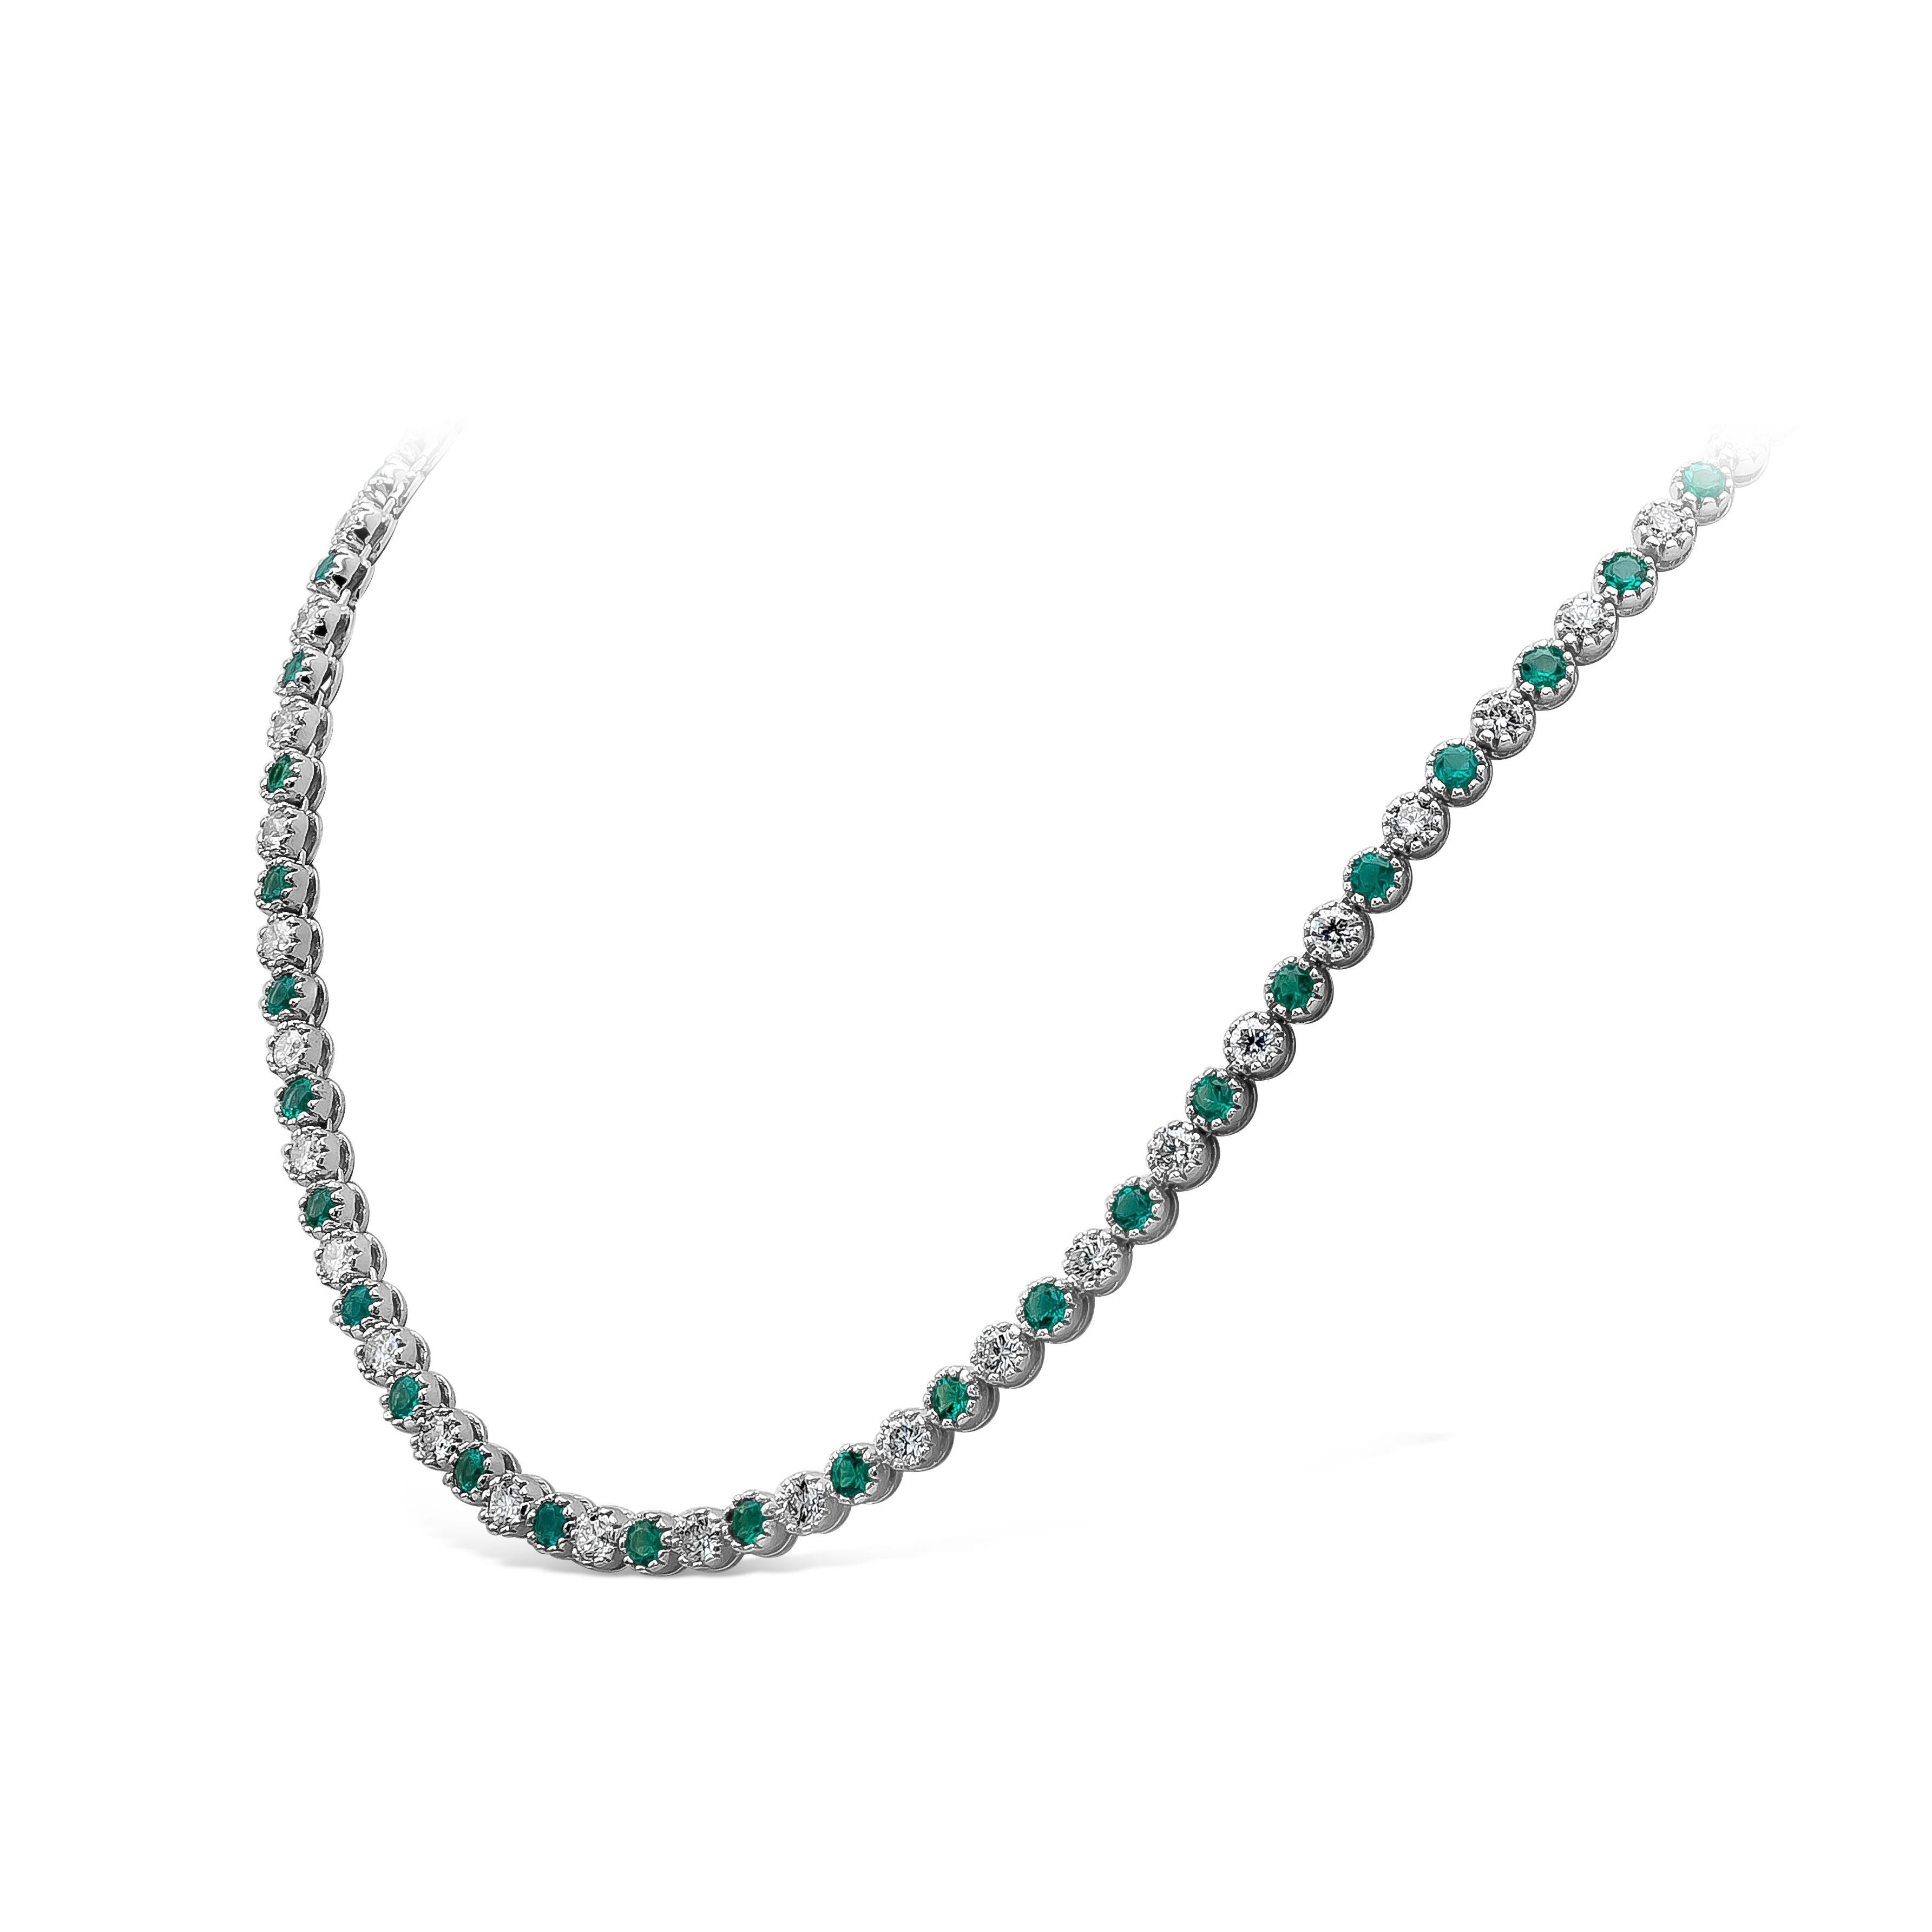 A beautifully finished, delicate and refined vibrant green tennis necklace alternately designed with brilliant round diamonds weighing 6.43 carats, F-G Color and SI1 in Clarity. Emerald weighs 5.39 carats. Made with 18K White Gold, 16.75 inches in